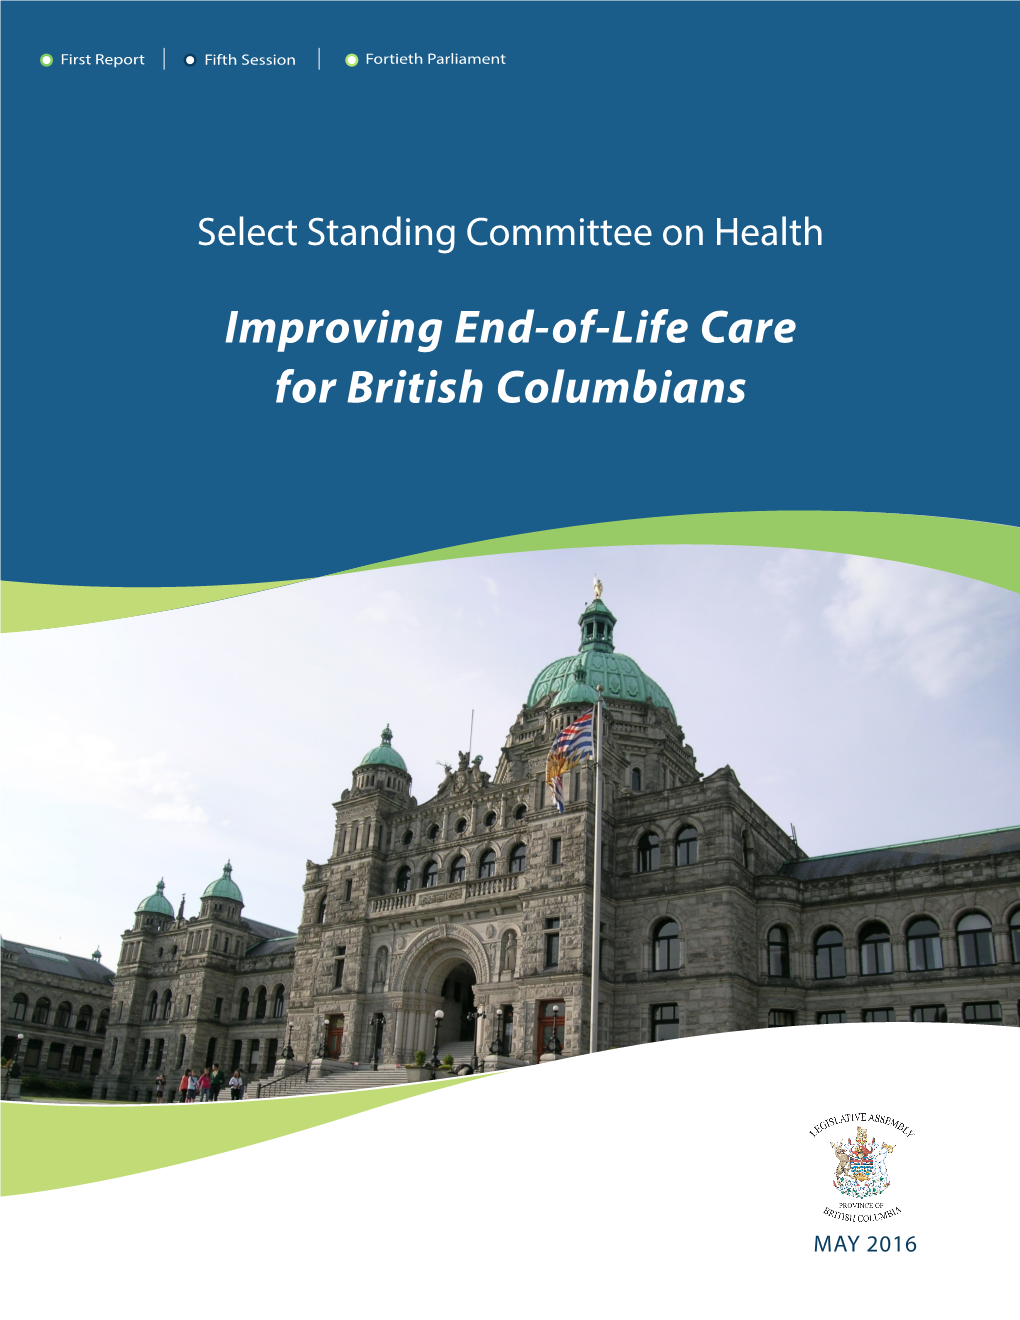 Improving End-Of-Life Care for British Columbians